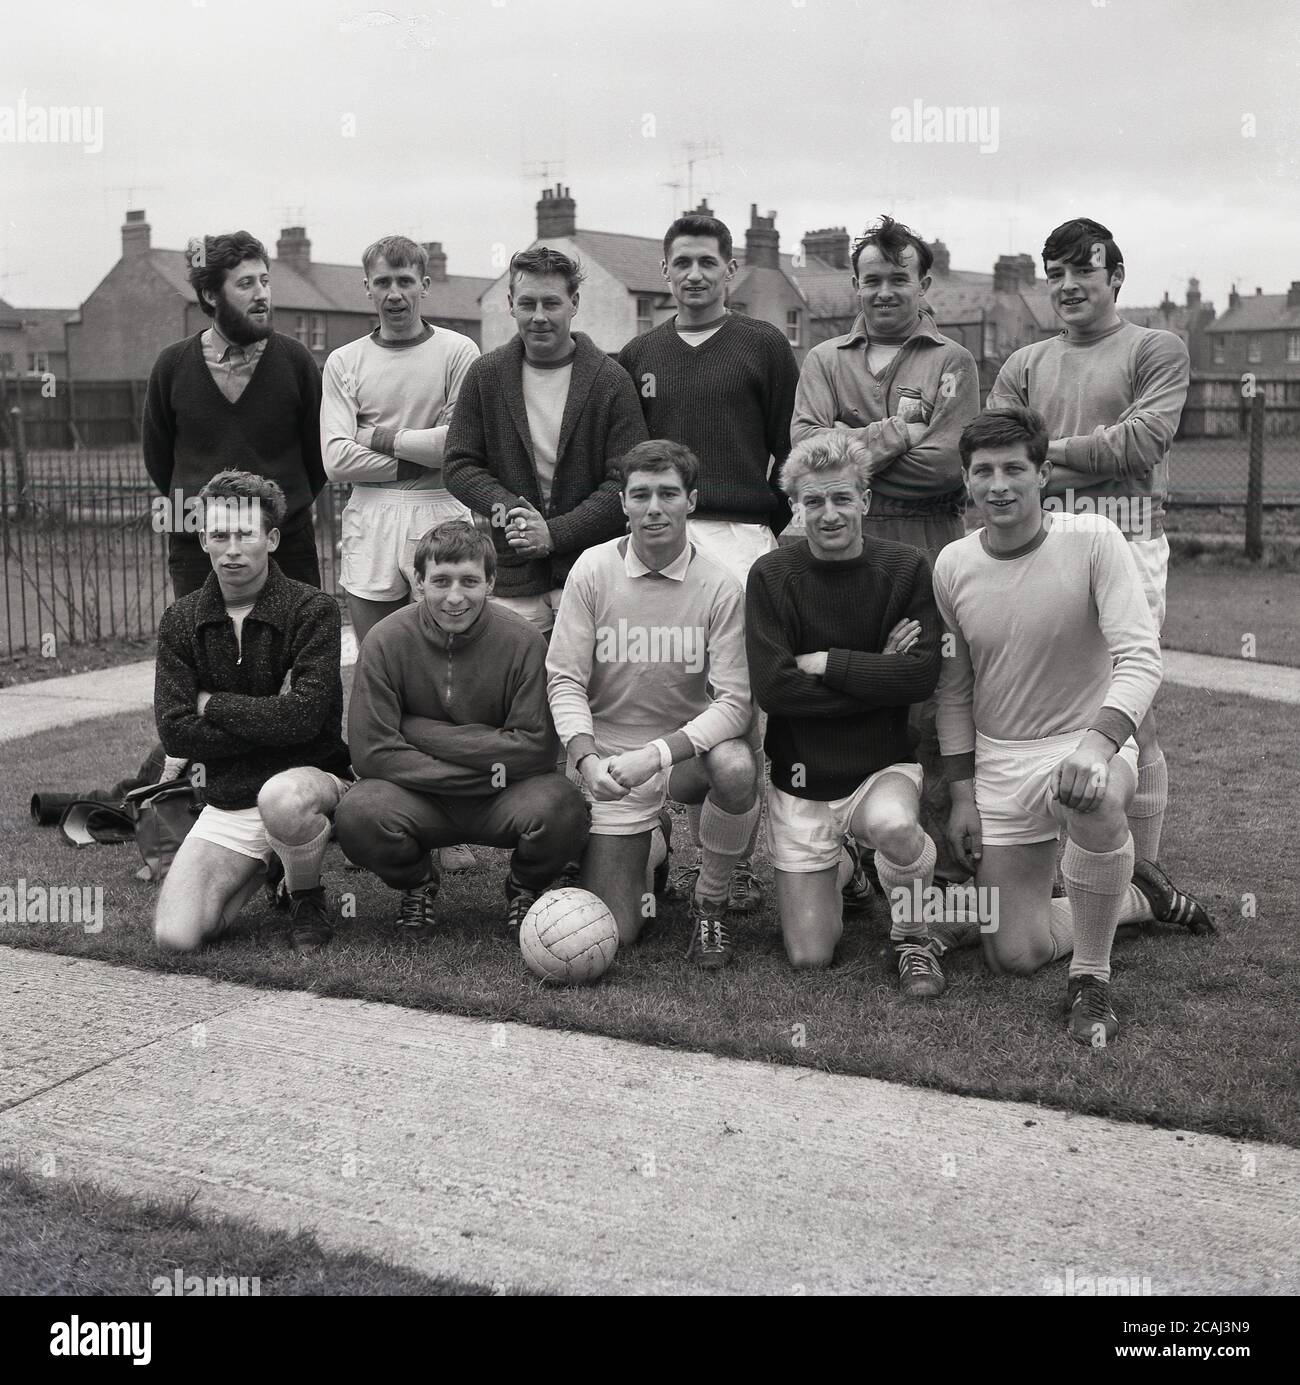 1965, historical, amateur village football team, group picture, showing the soccer kit, boots and sports clothing of the day, Bucks, England, UK. Eleven men are in the photo, but not sure why only 10 footballers are in kit or tracksuits.... Stock Photo